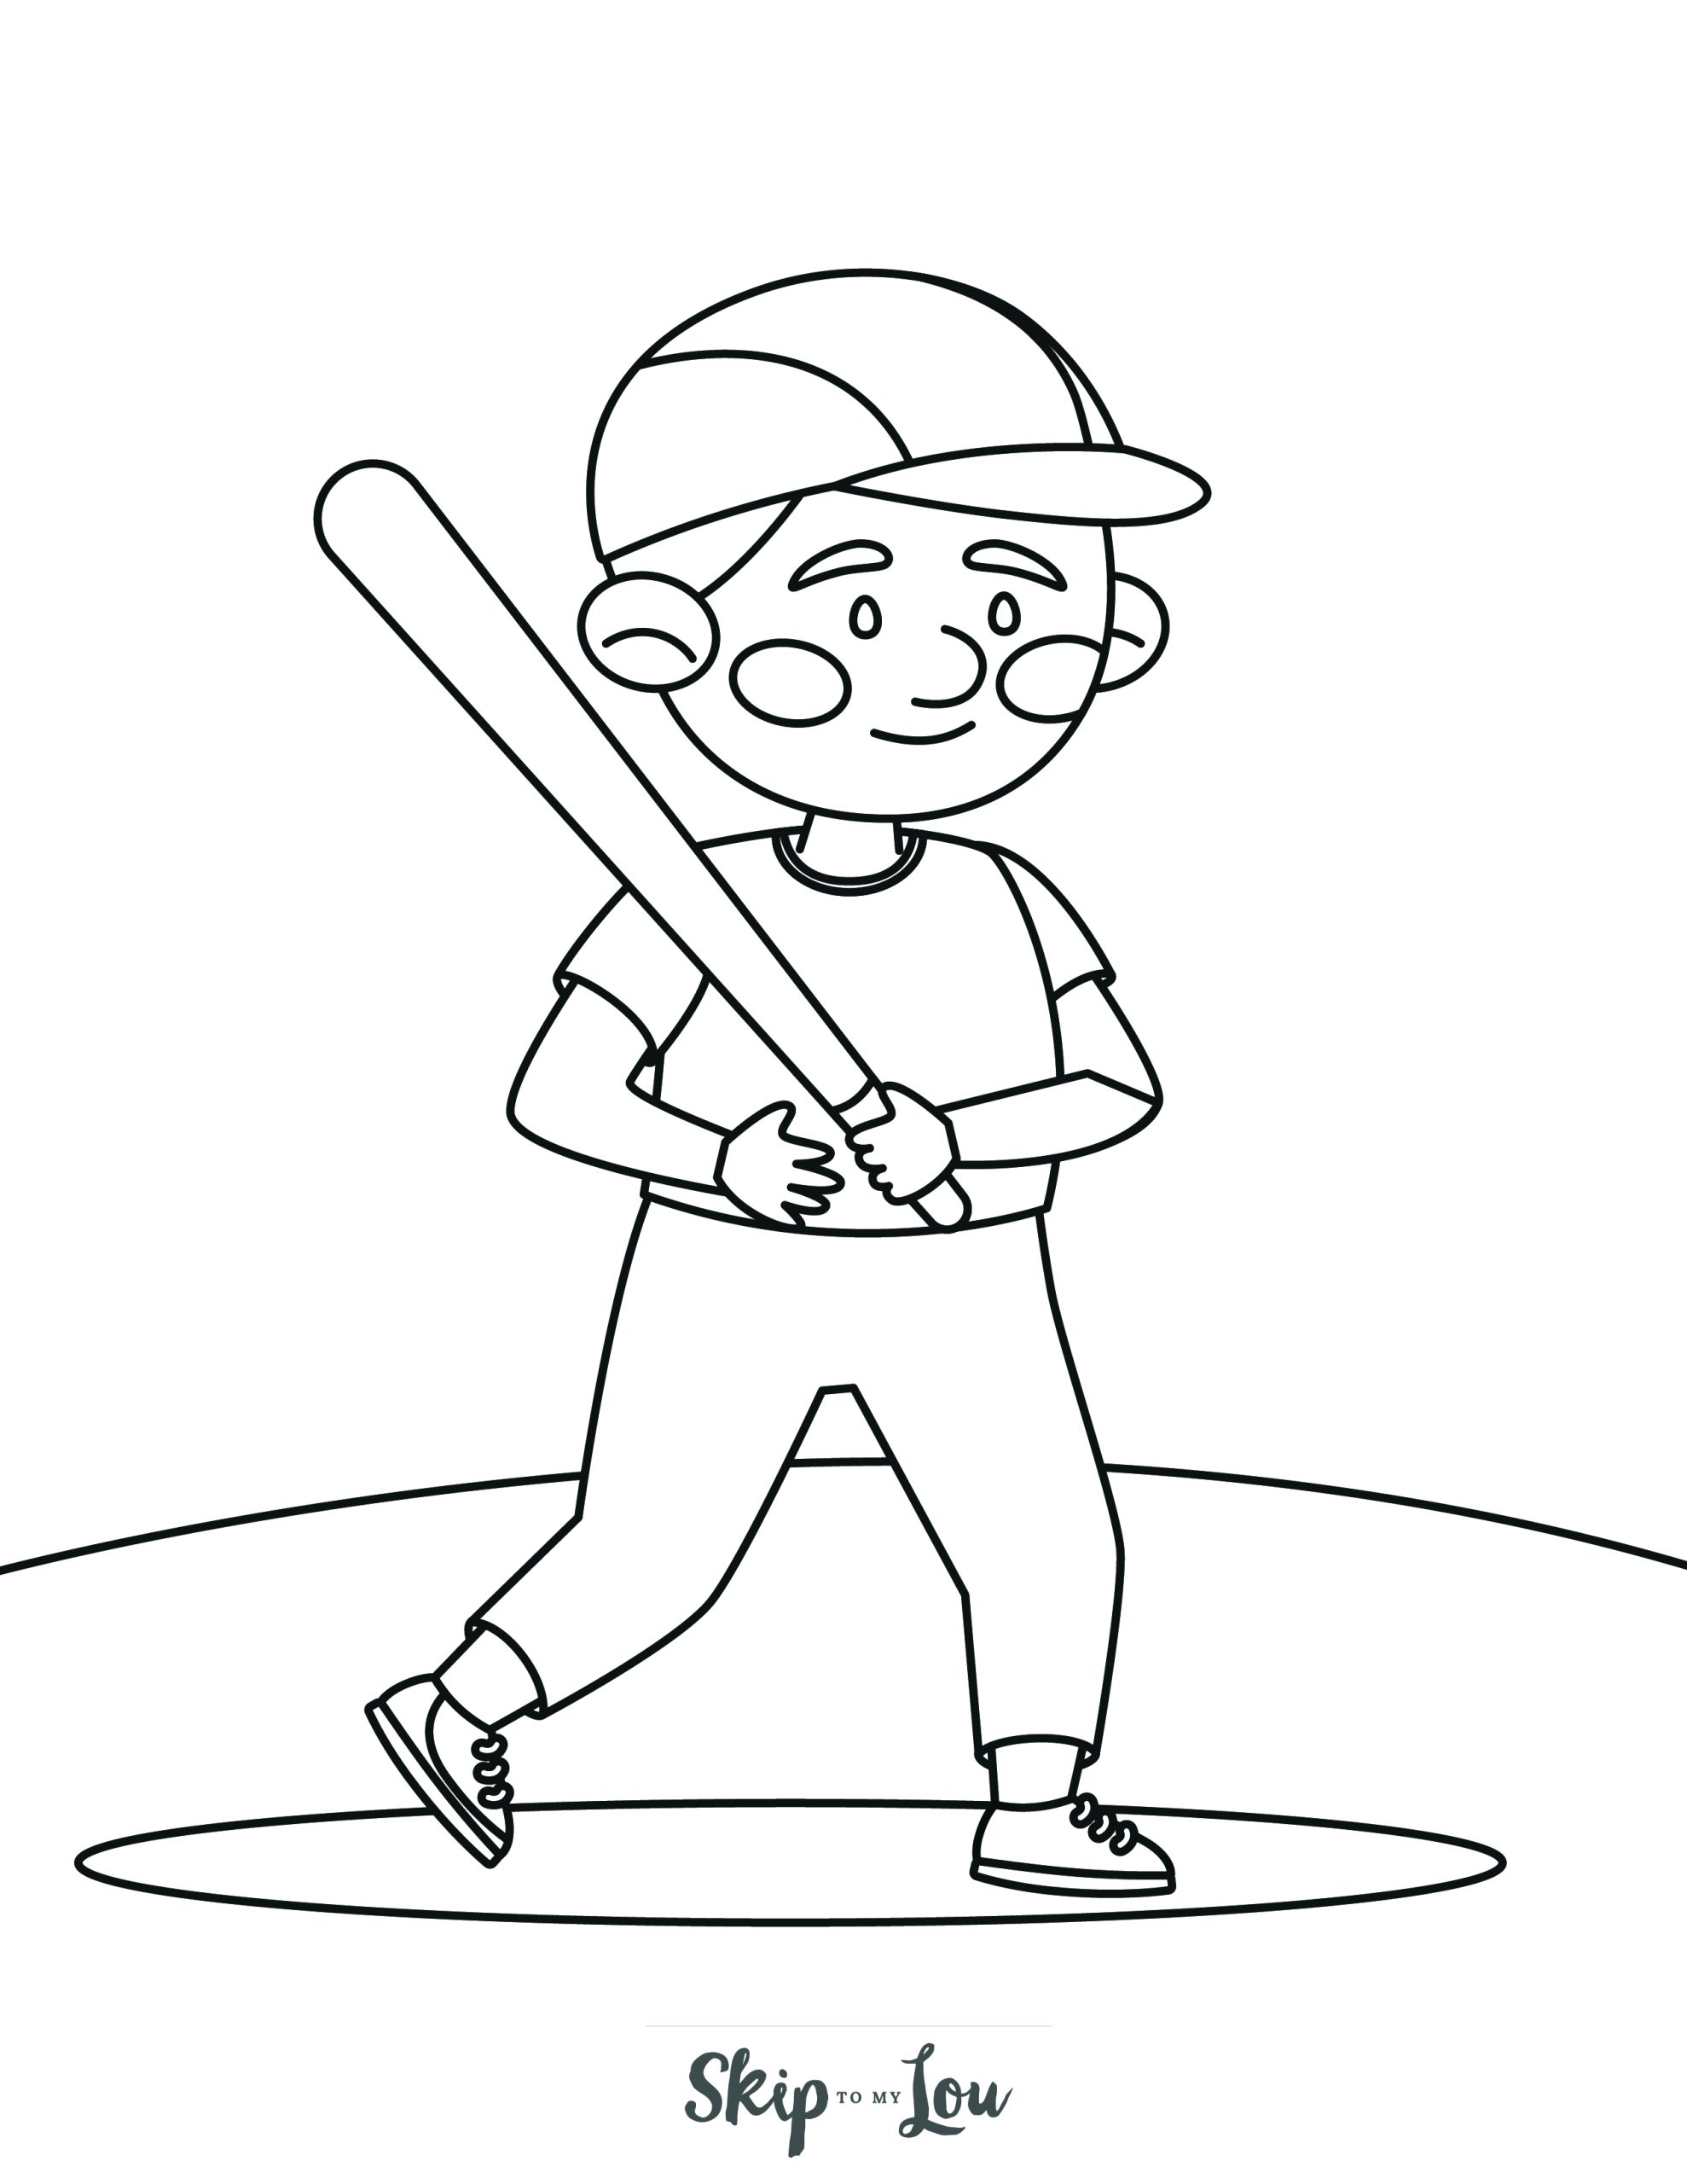 Baseball Coloring Page 12 - A line drawing of a young boy baseball player holding a bat.